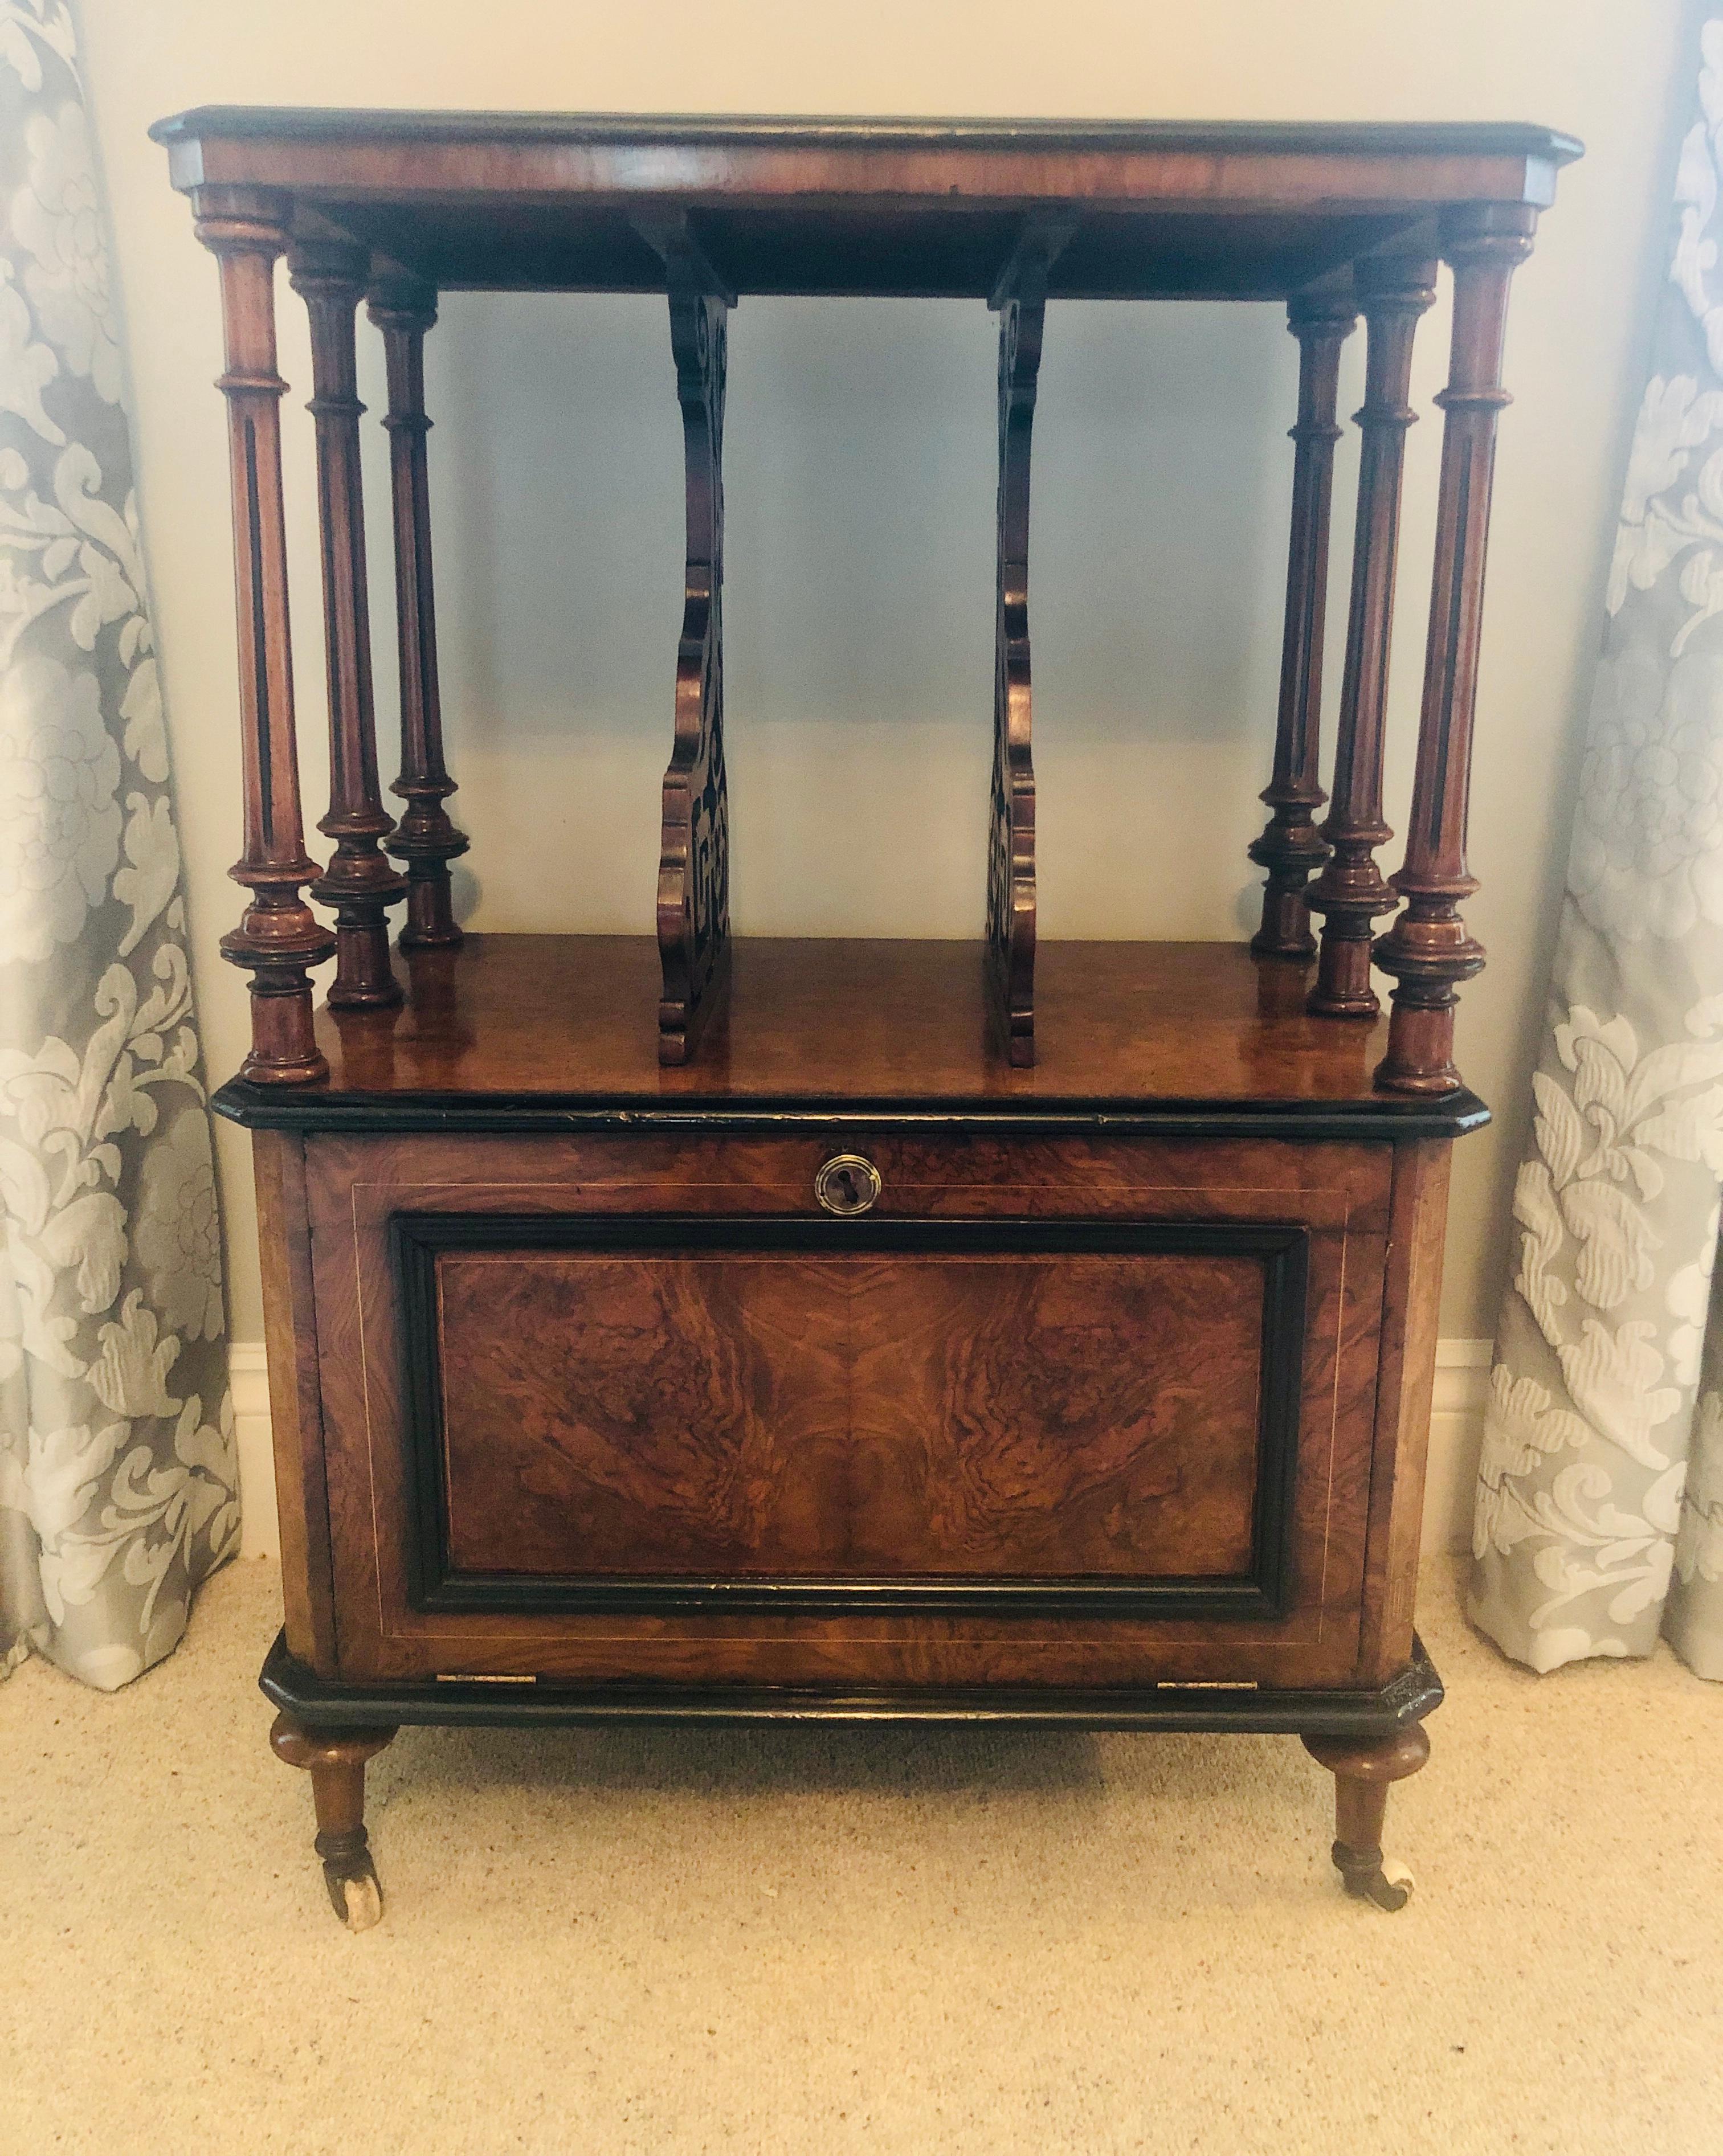 Outstanding quality Victorian inlaid burr walnut music cabinet/canterbury. This exceptional piece boasts an original brass pierced gallery above a fine inlaid burr walnut top with a satinwood inlay decoration which is raised on 6 delightfully carved